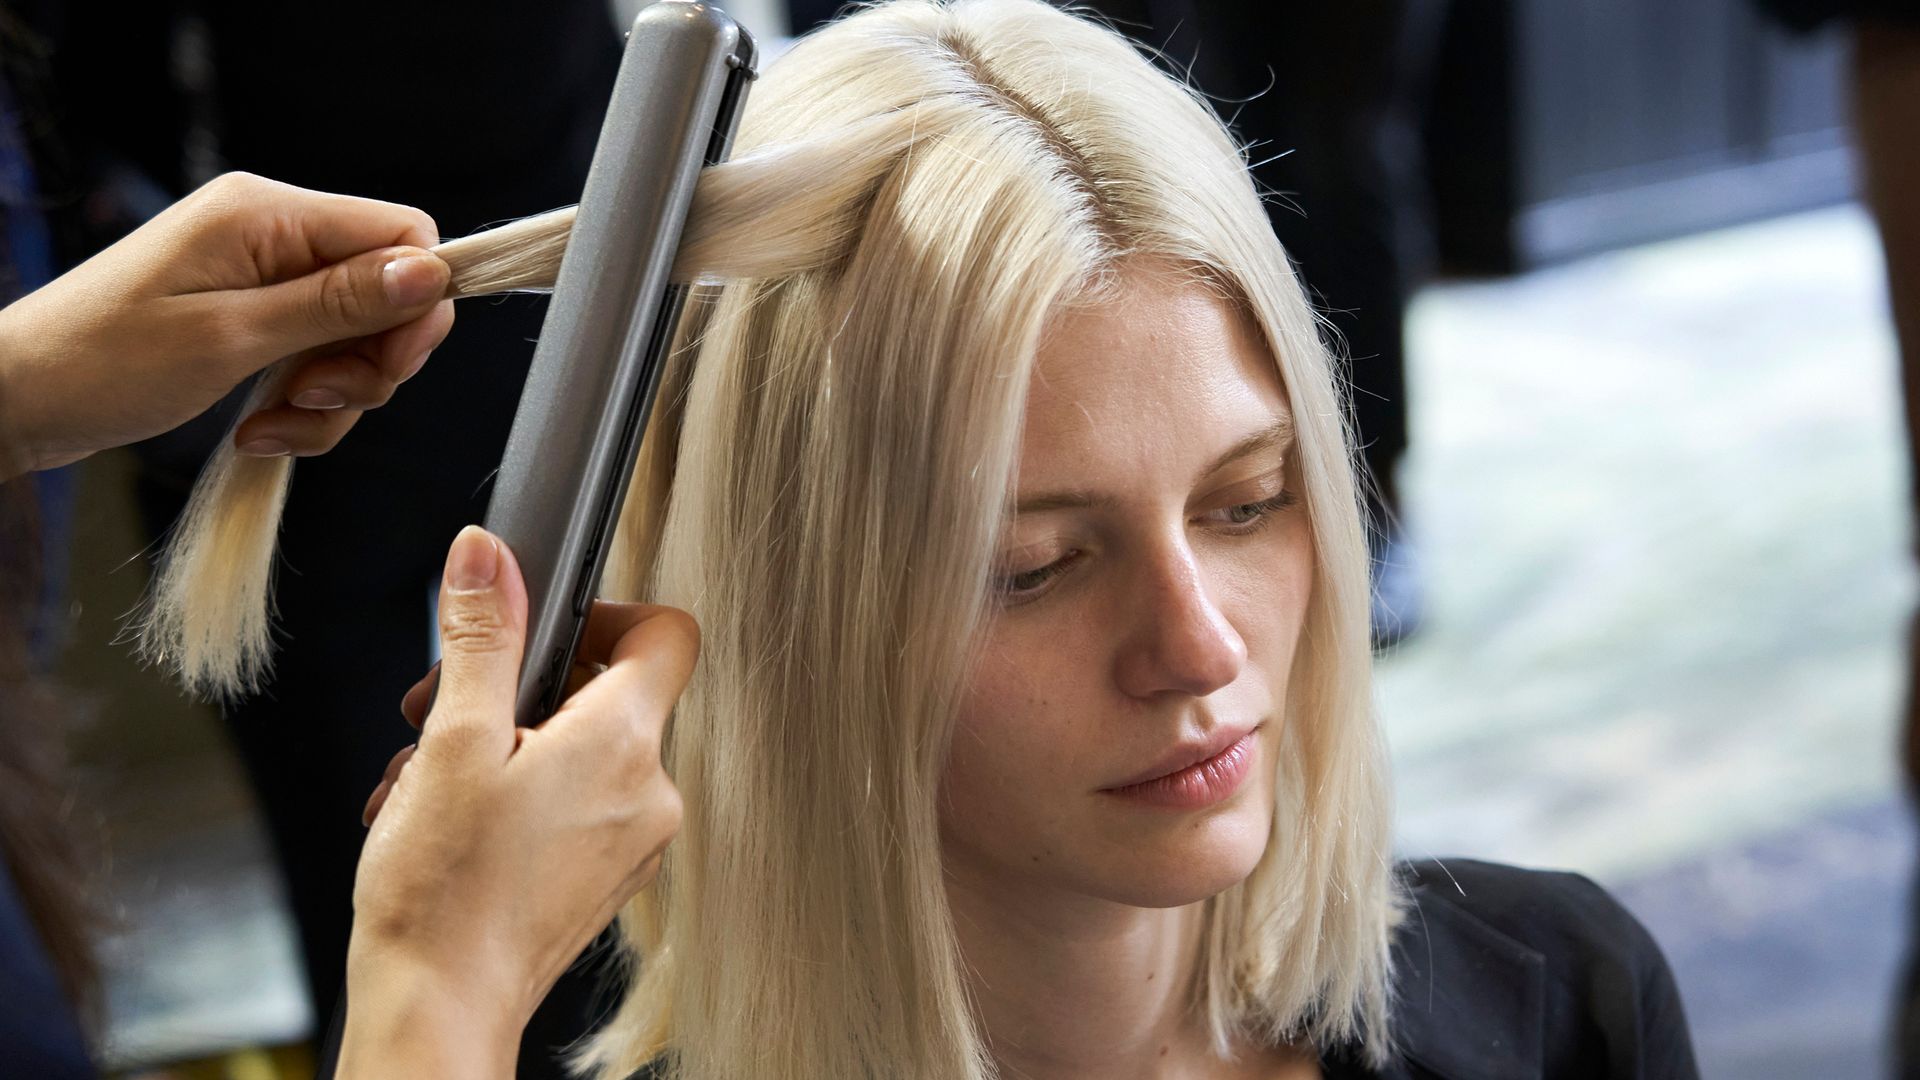 Straight hair trend 2022 - Hair straighteners at the ready